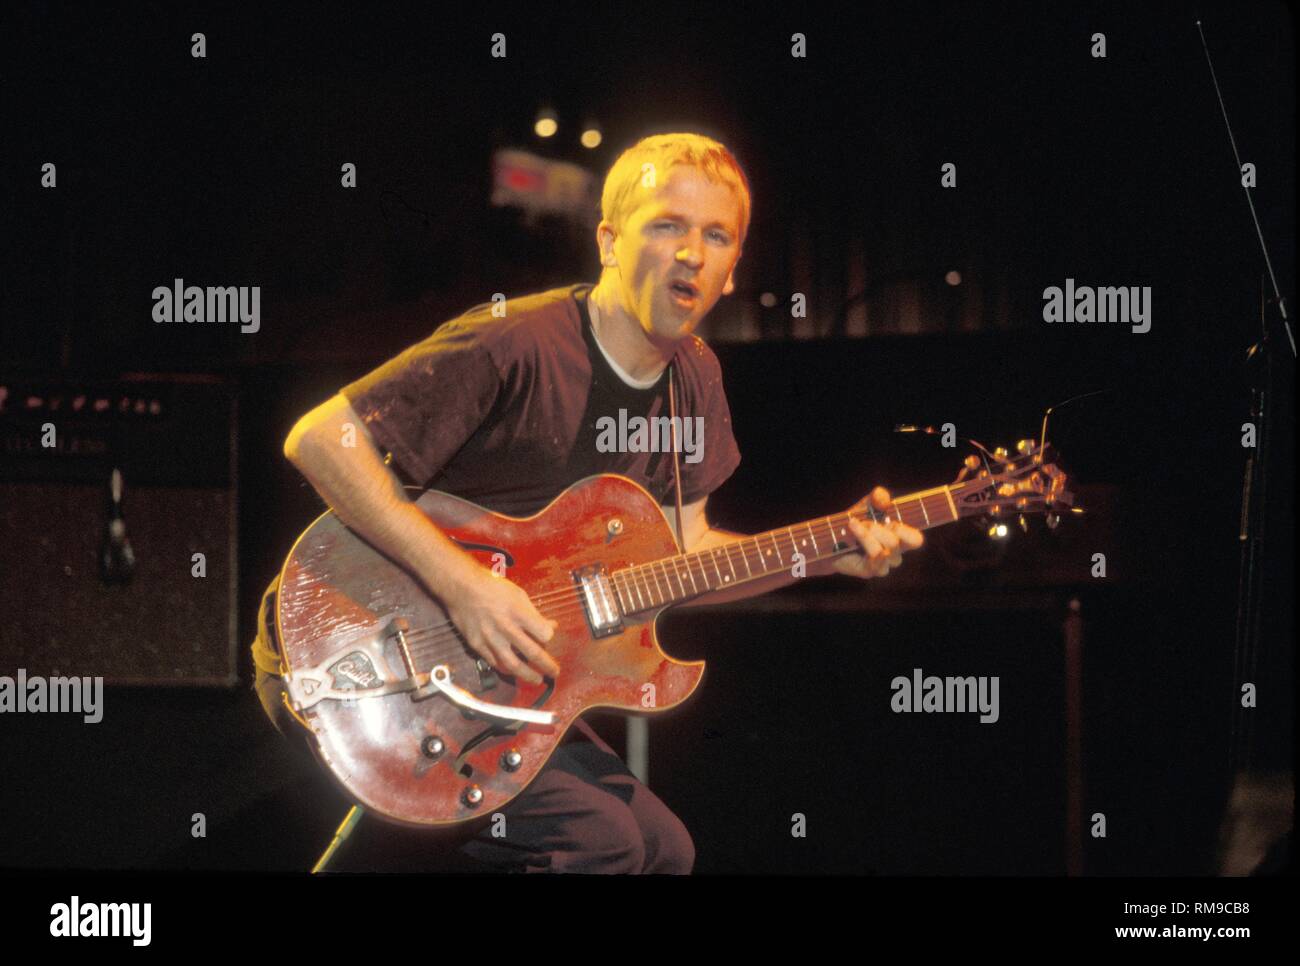 Cake lead guitarist Greg Brown is shown performing on stage during a 'live' concert appearance. Stock Photo